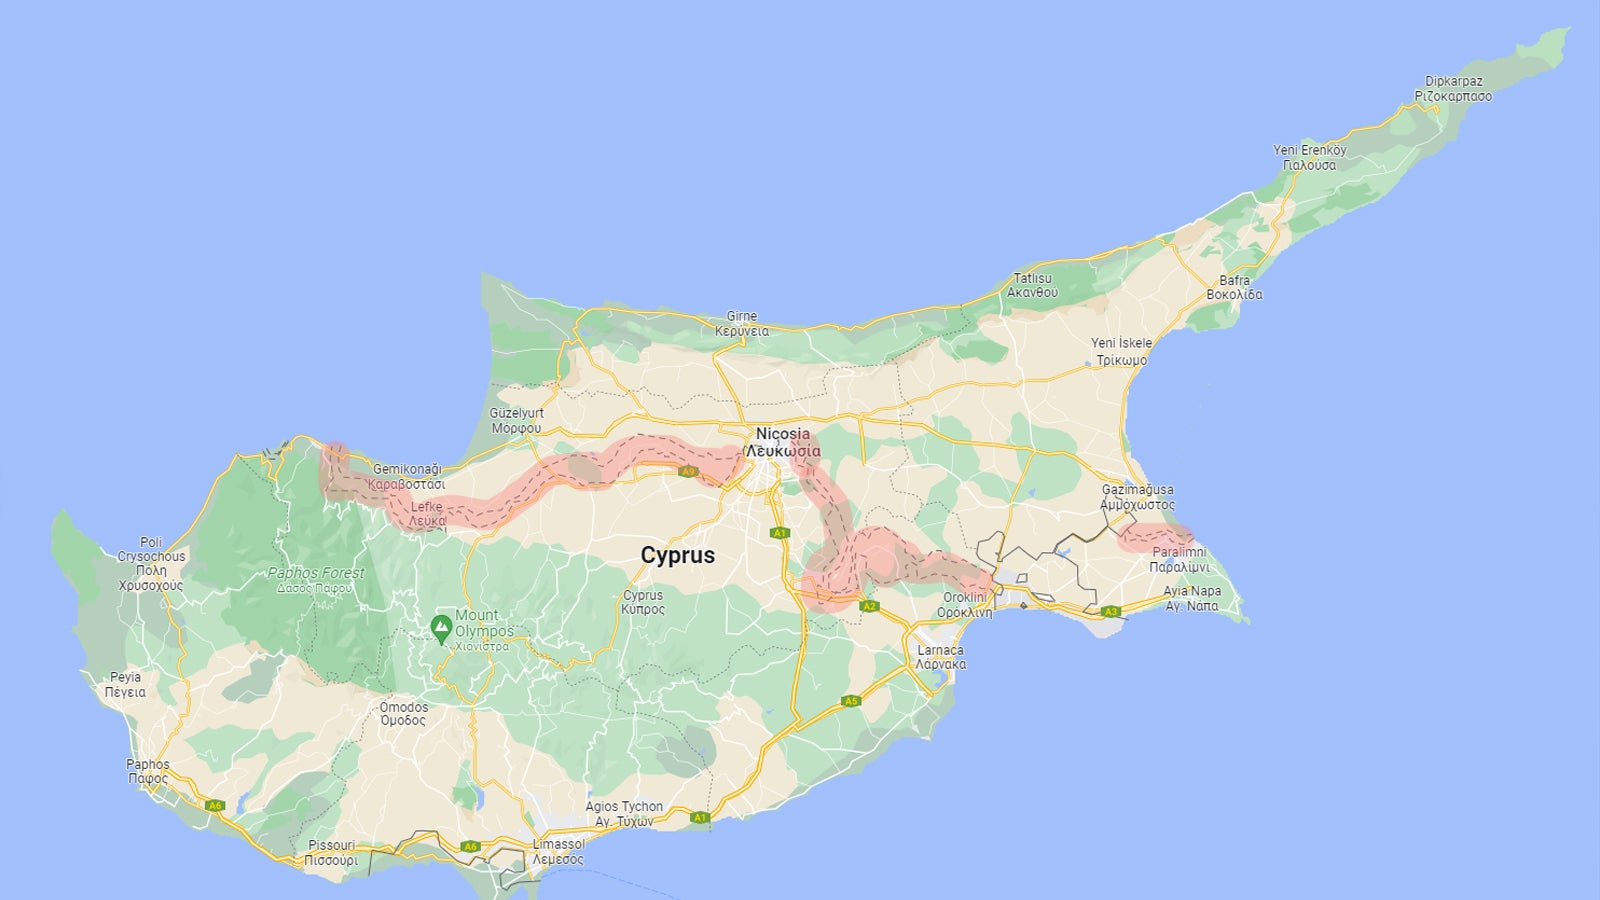 Cyprus' UN Buffer Zone, highlighted in red.